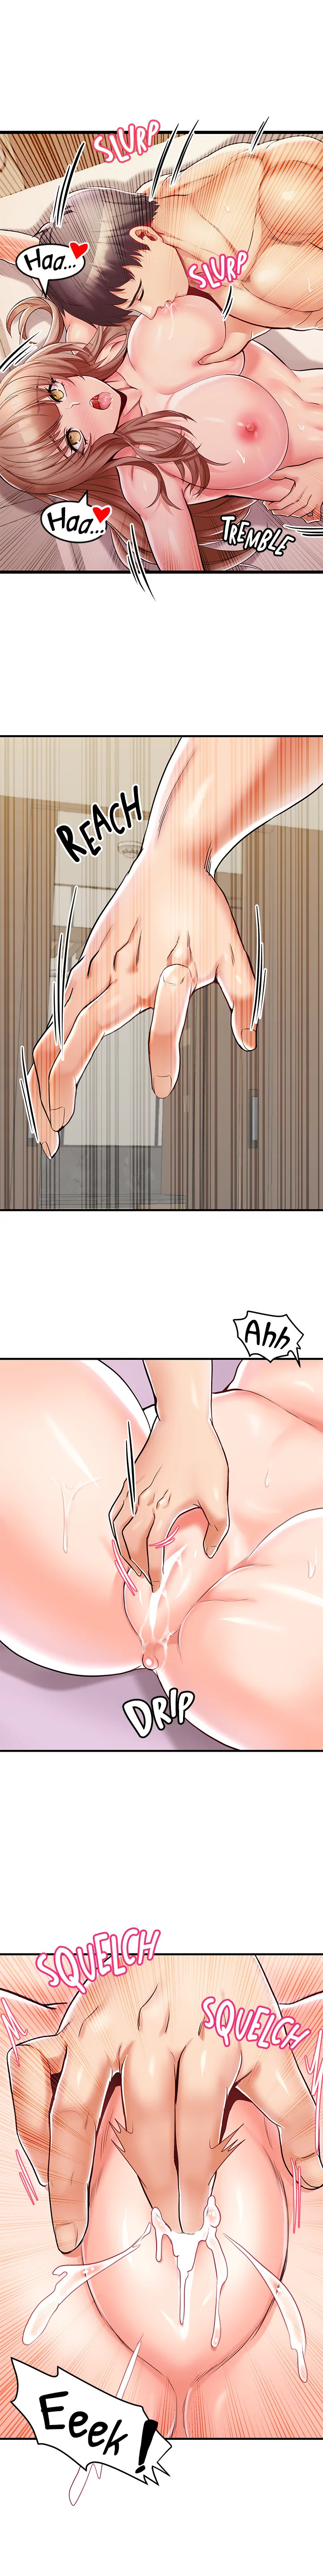 Phone Sex Chapter 16 - Page 7